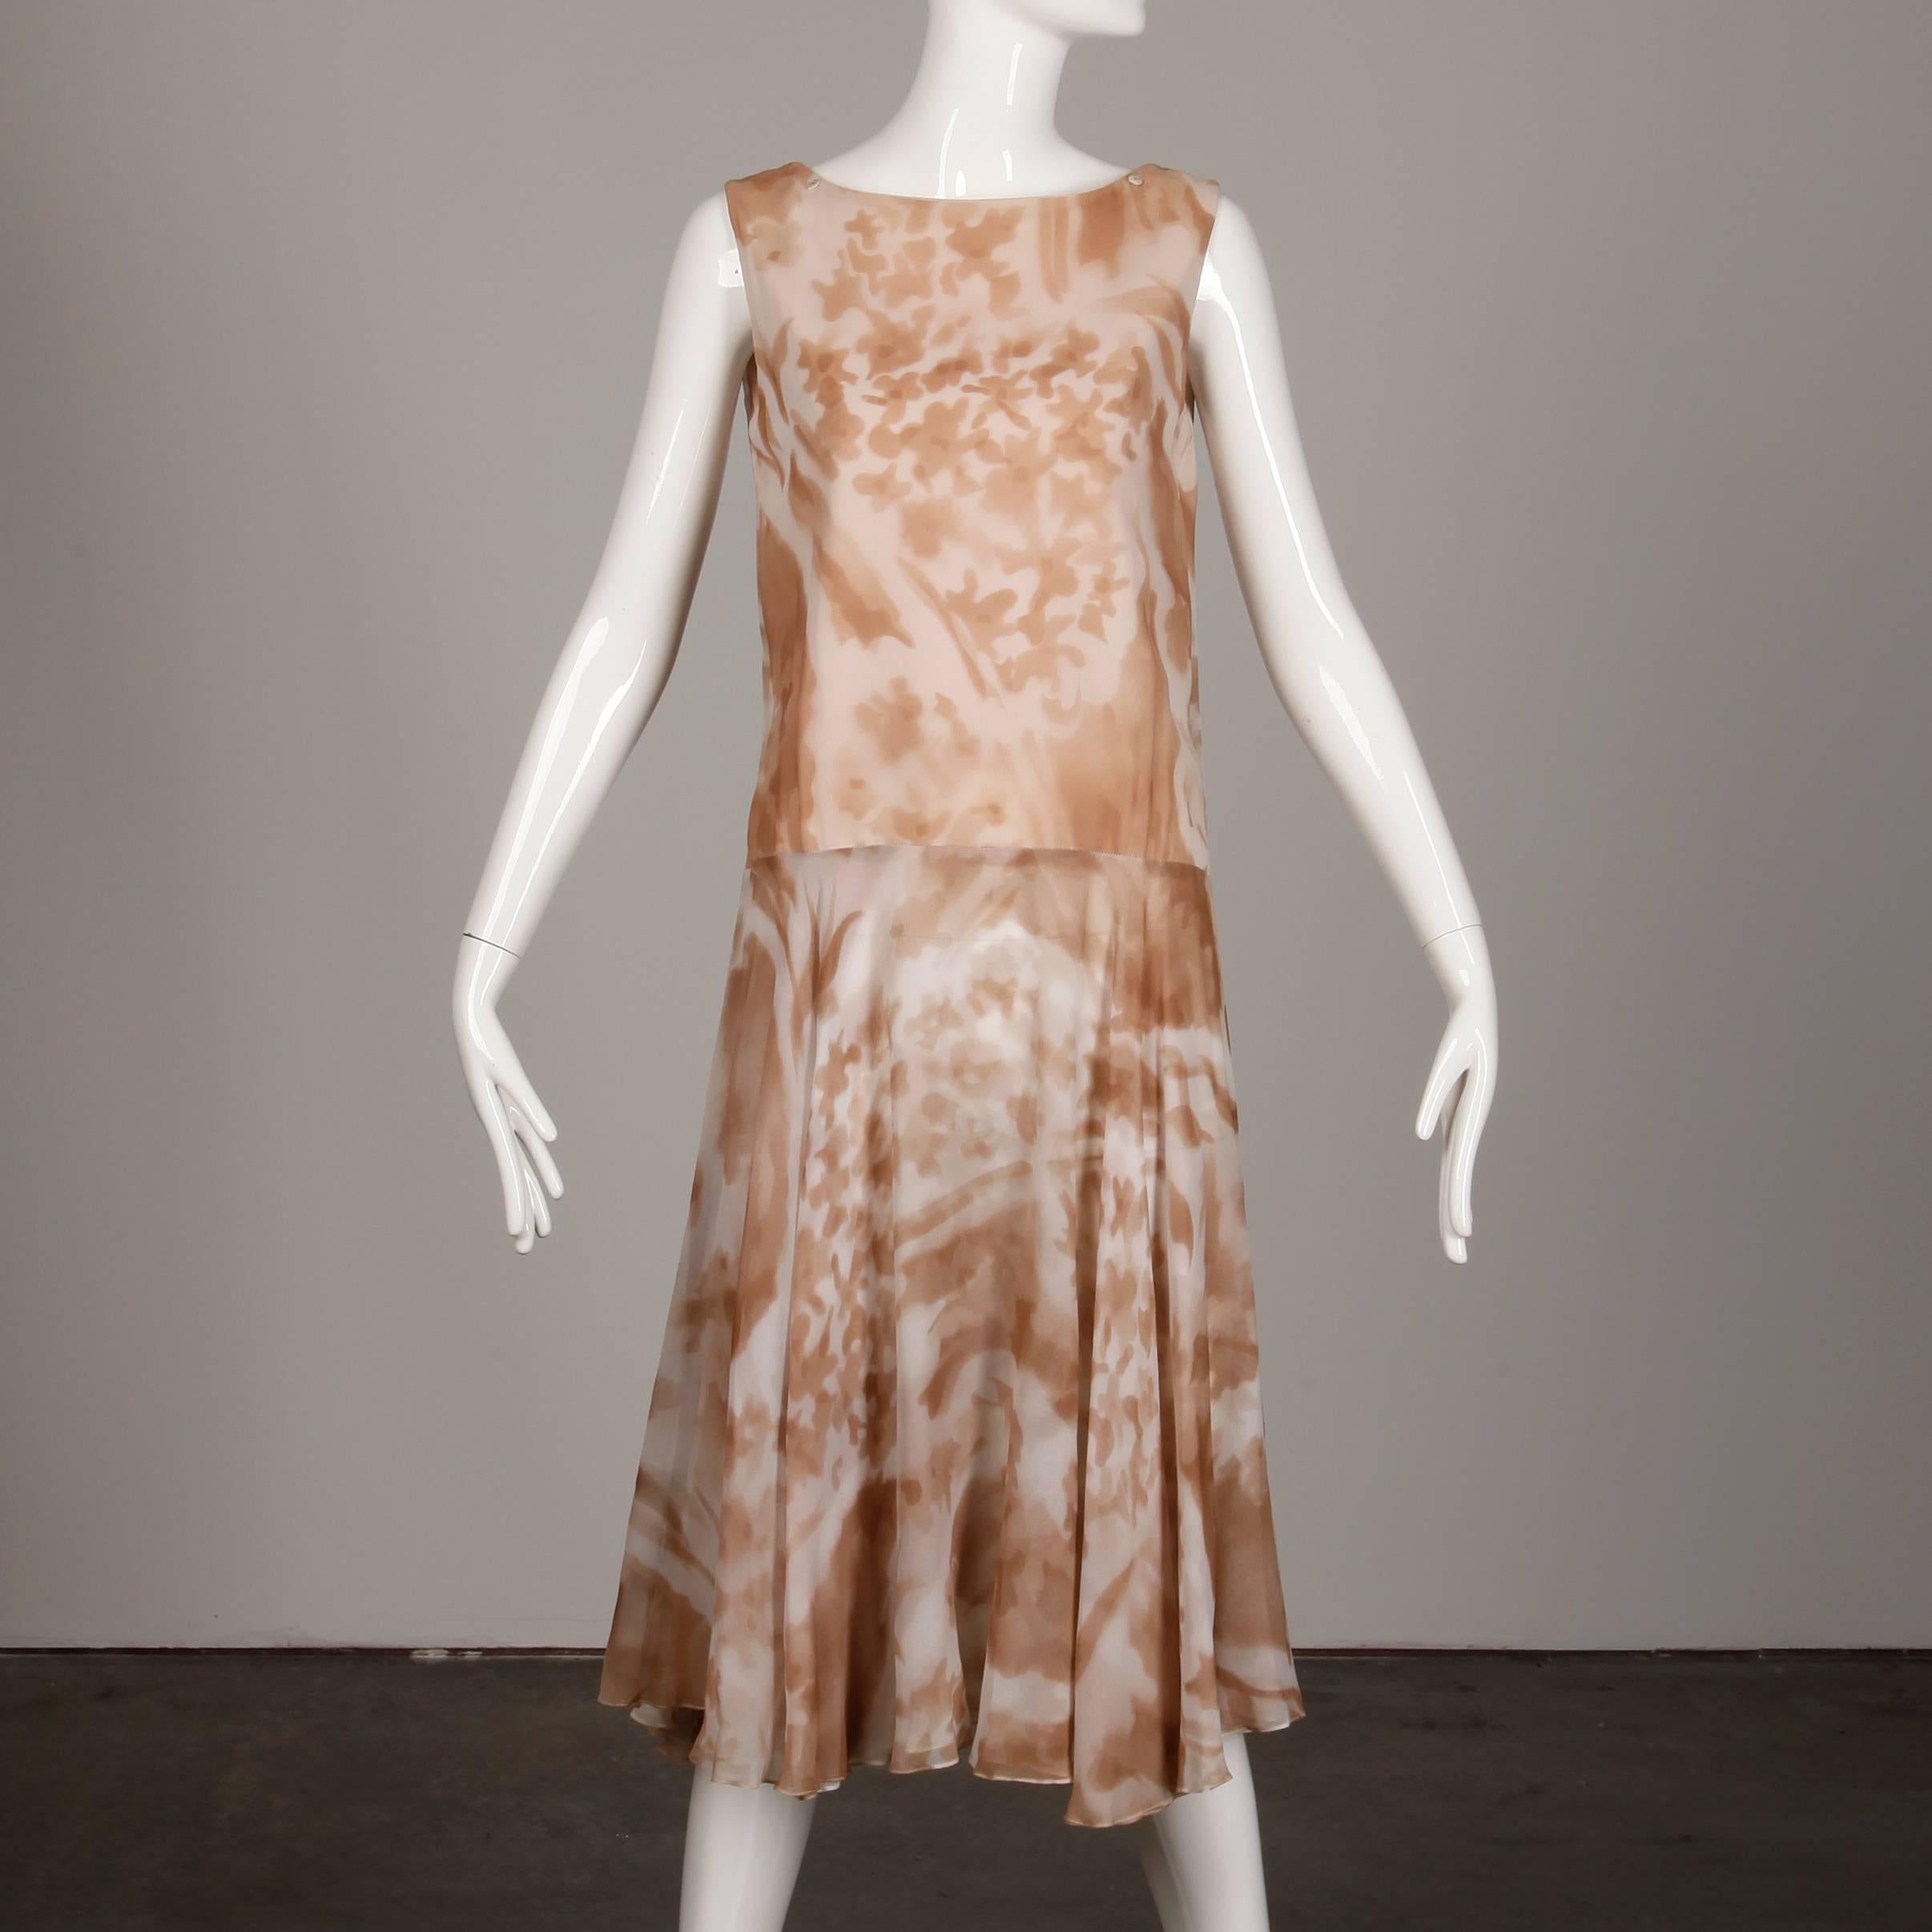 1970s Mr. Blackwell Vintage Sheer Silk Chiffon Print Dress with Detachable Cape For Sale 2